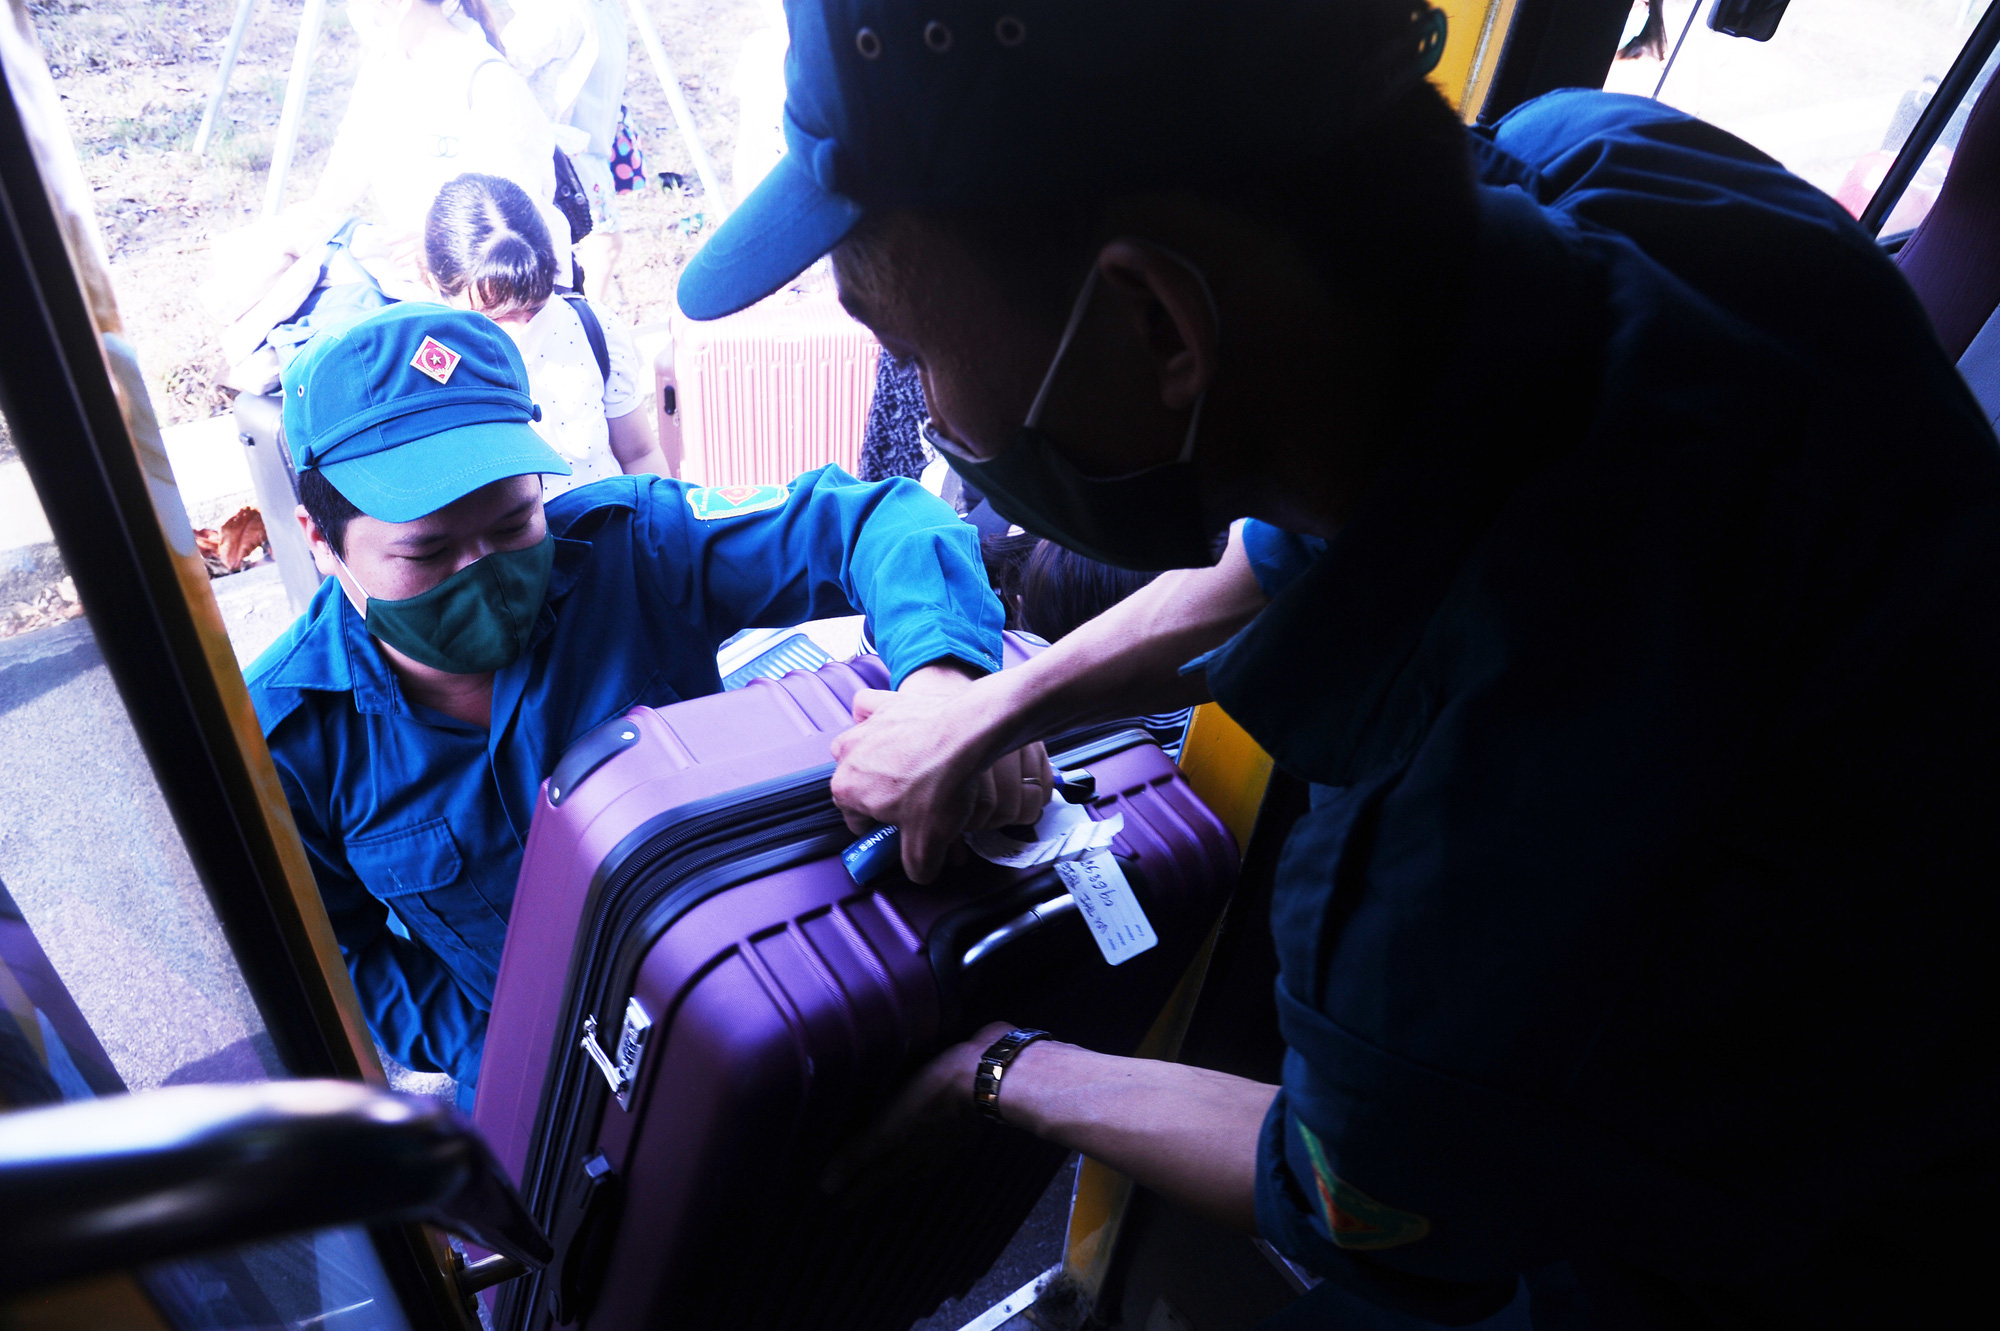 Staff members at a novel coronavirus disease (COVID-19) quarantine zone in Quang Nam Province, Vietnam help pregnant women carry their luggage onto a bus after completing their mandatory quarantine, June 12, 2020. Photo: Le Trung / Tuoi Tre